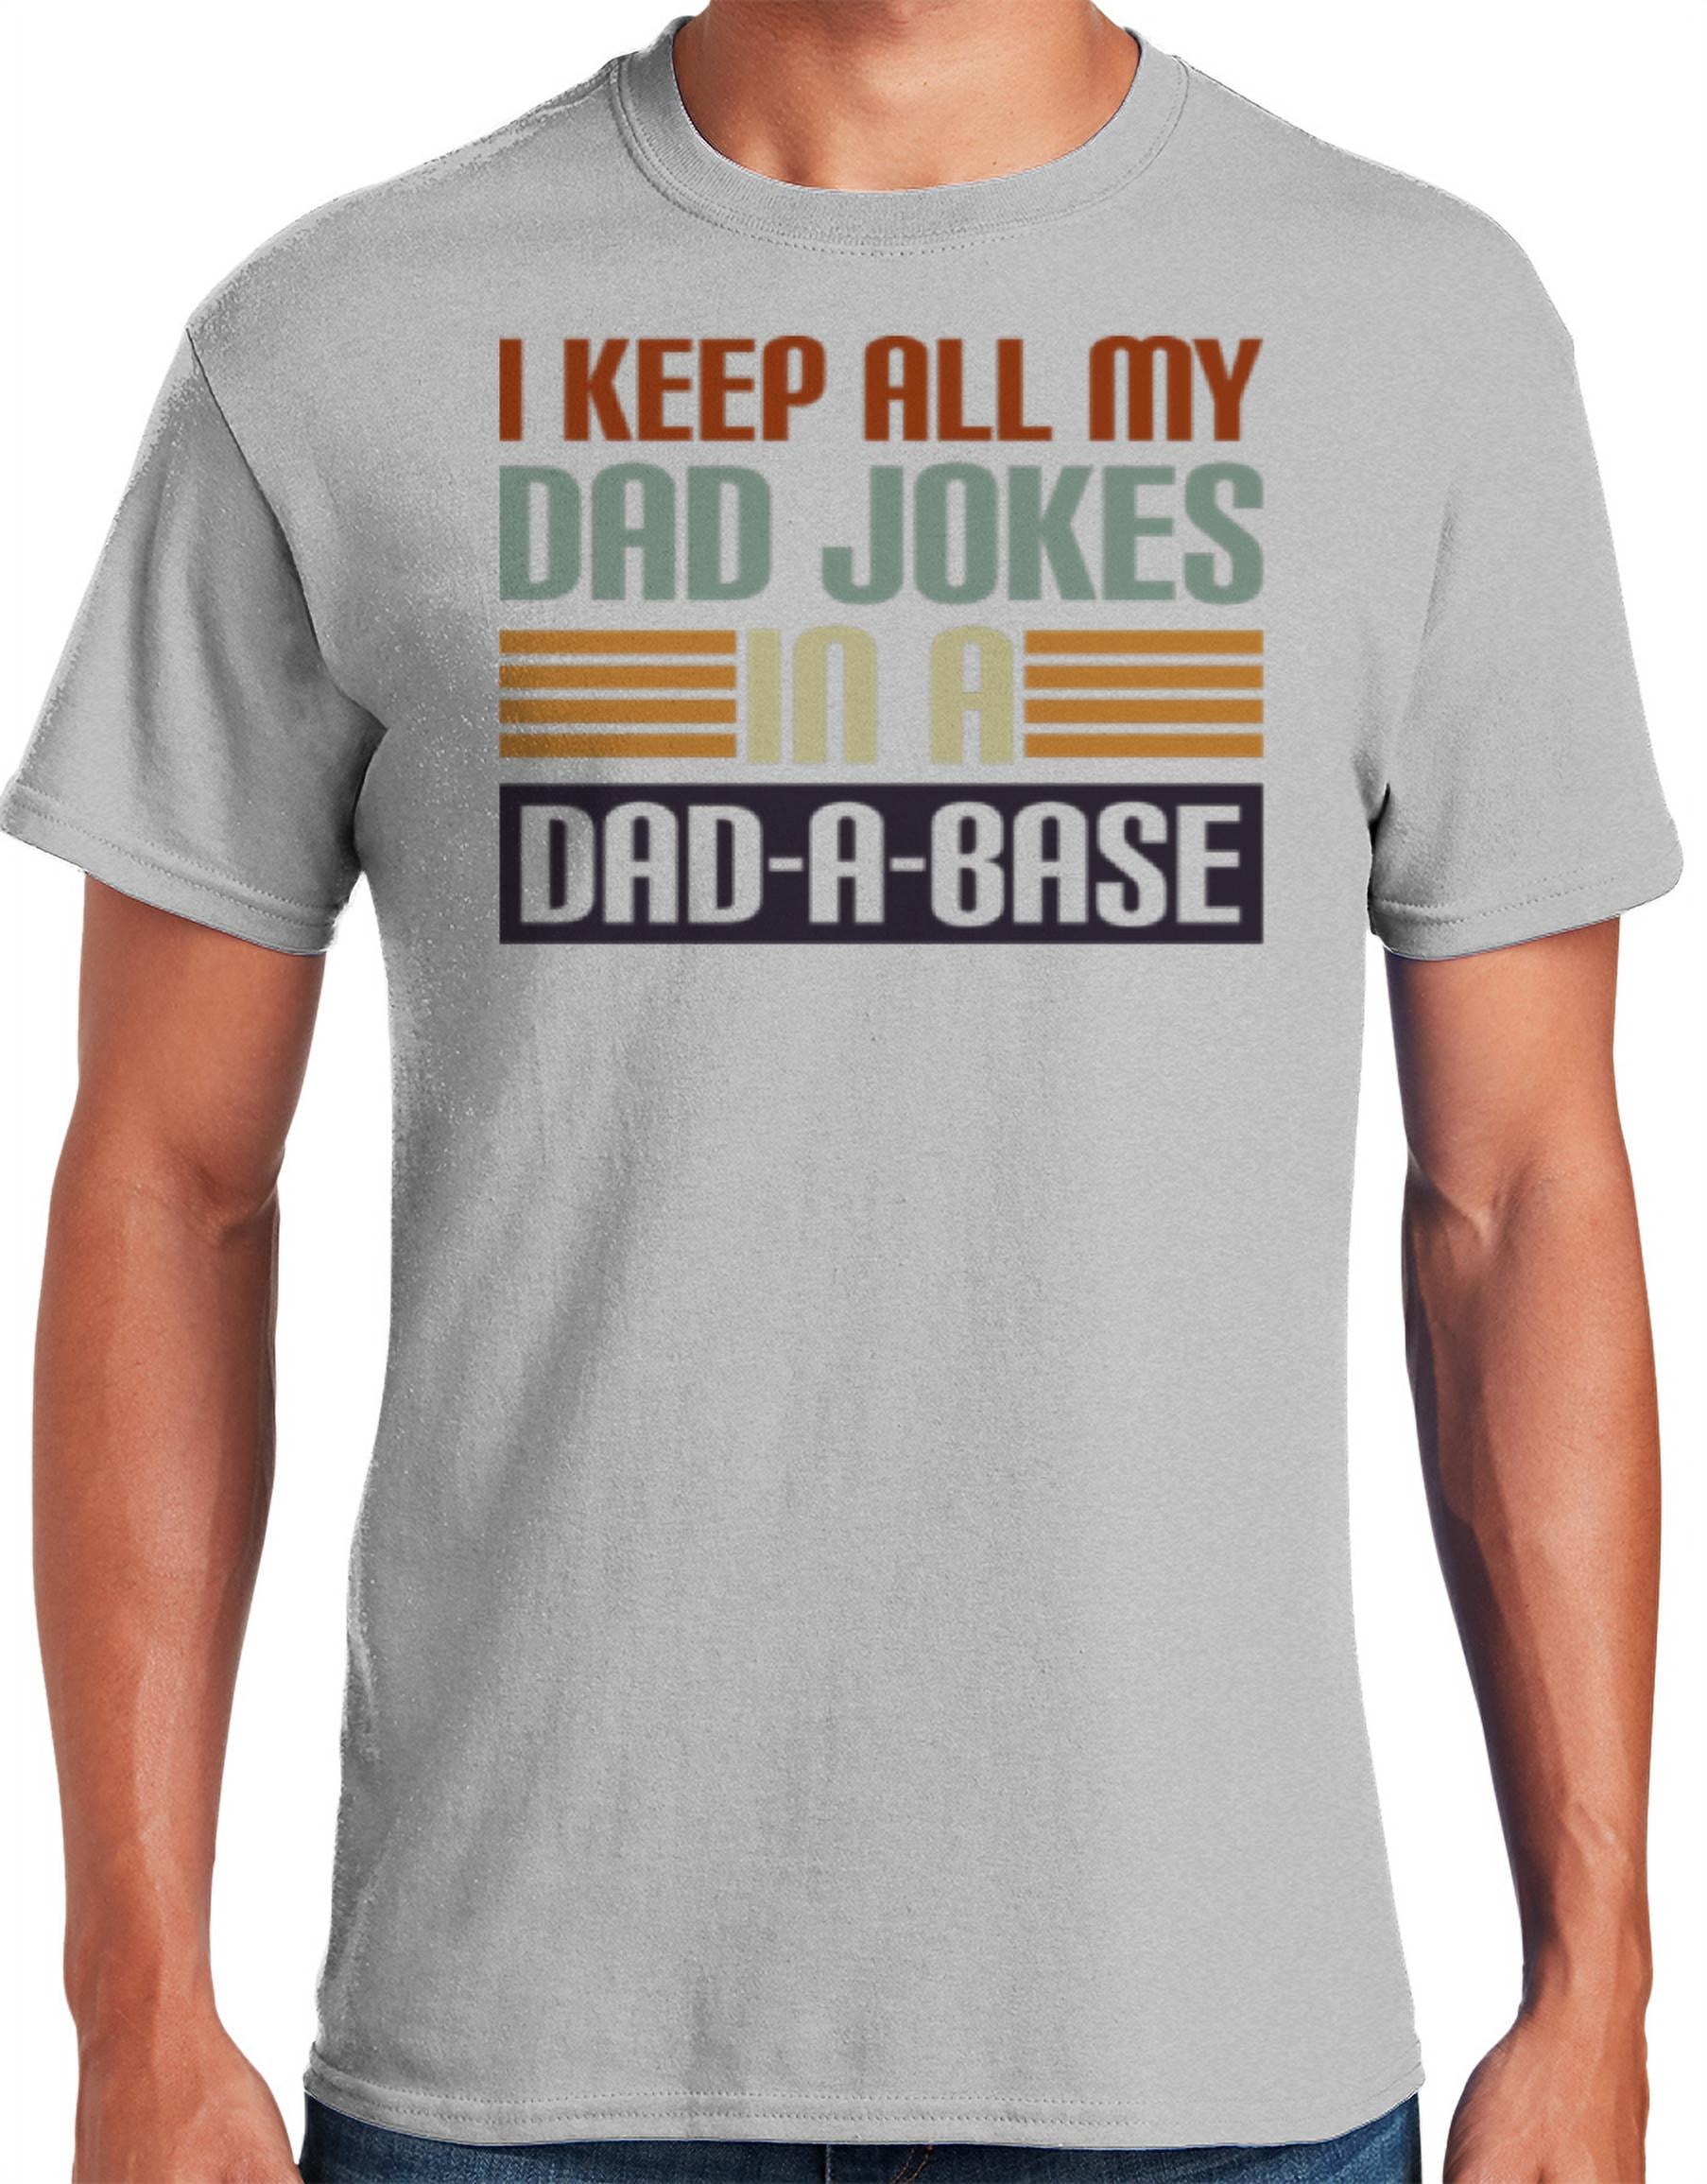 Christmas Gift For Dad Dad Shirt I'm Not Like a Regular Dad I'm a Cool Dad T Shirt Funny Dad Shirt Reel Cool Dad Mens Tank Top